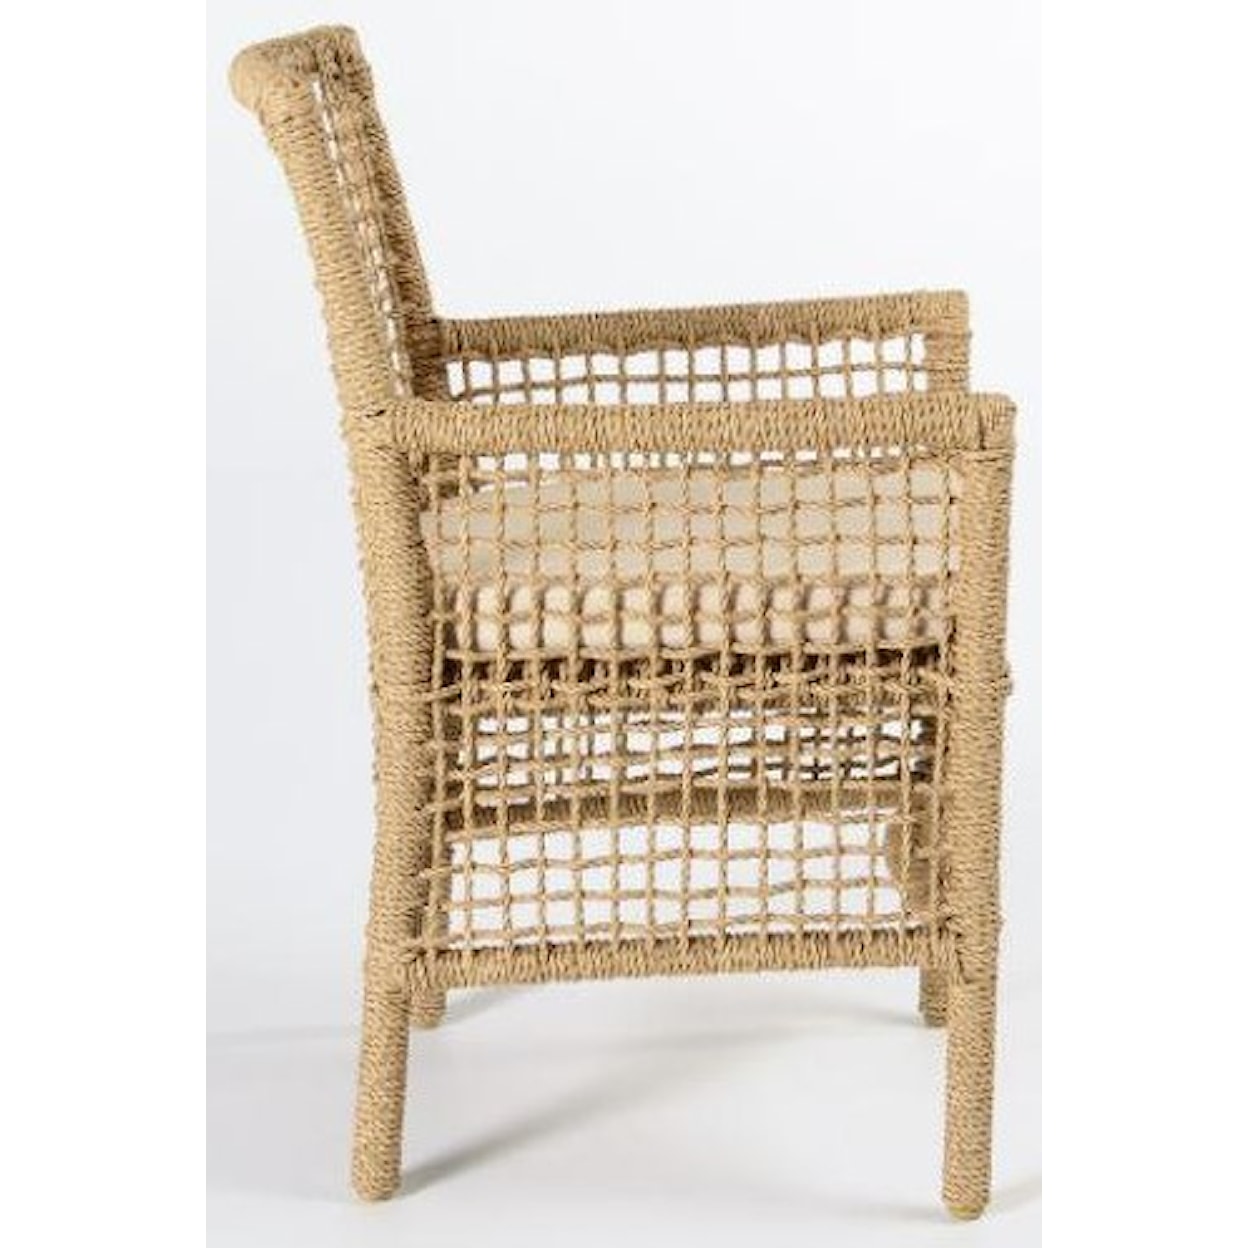 Classic Home Outdoor Brisbane Dining Chair